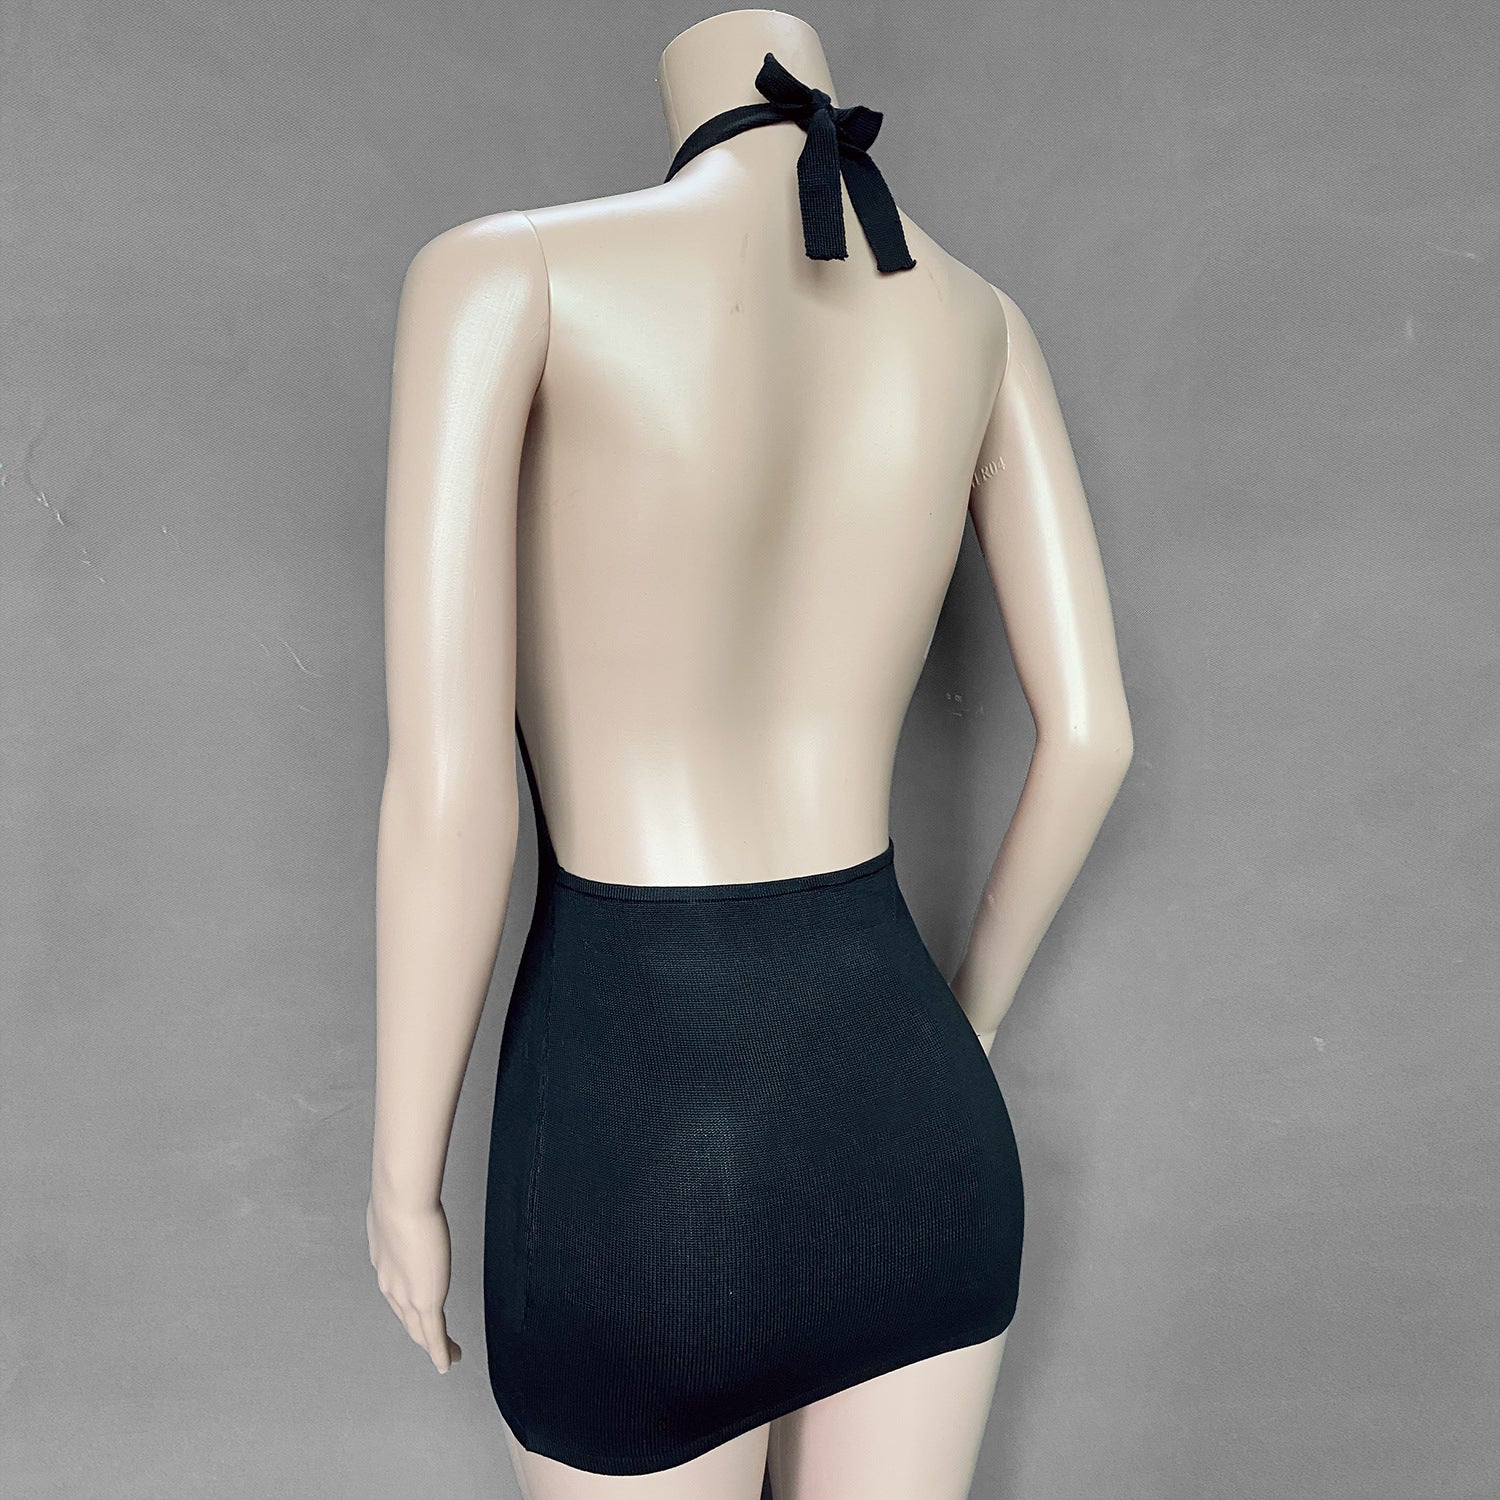 Best Selling Women Clothes Vacation Swimsuit Sexy Sheath Backless Strap Sweaters Dress